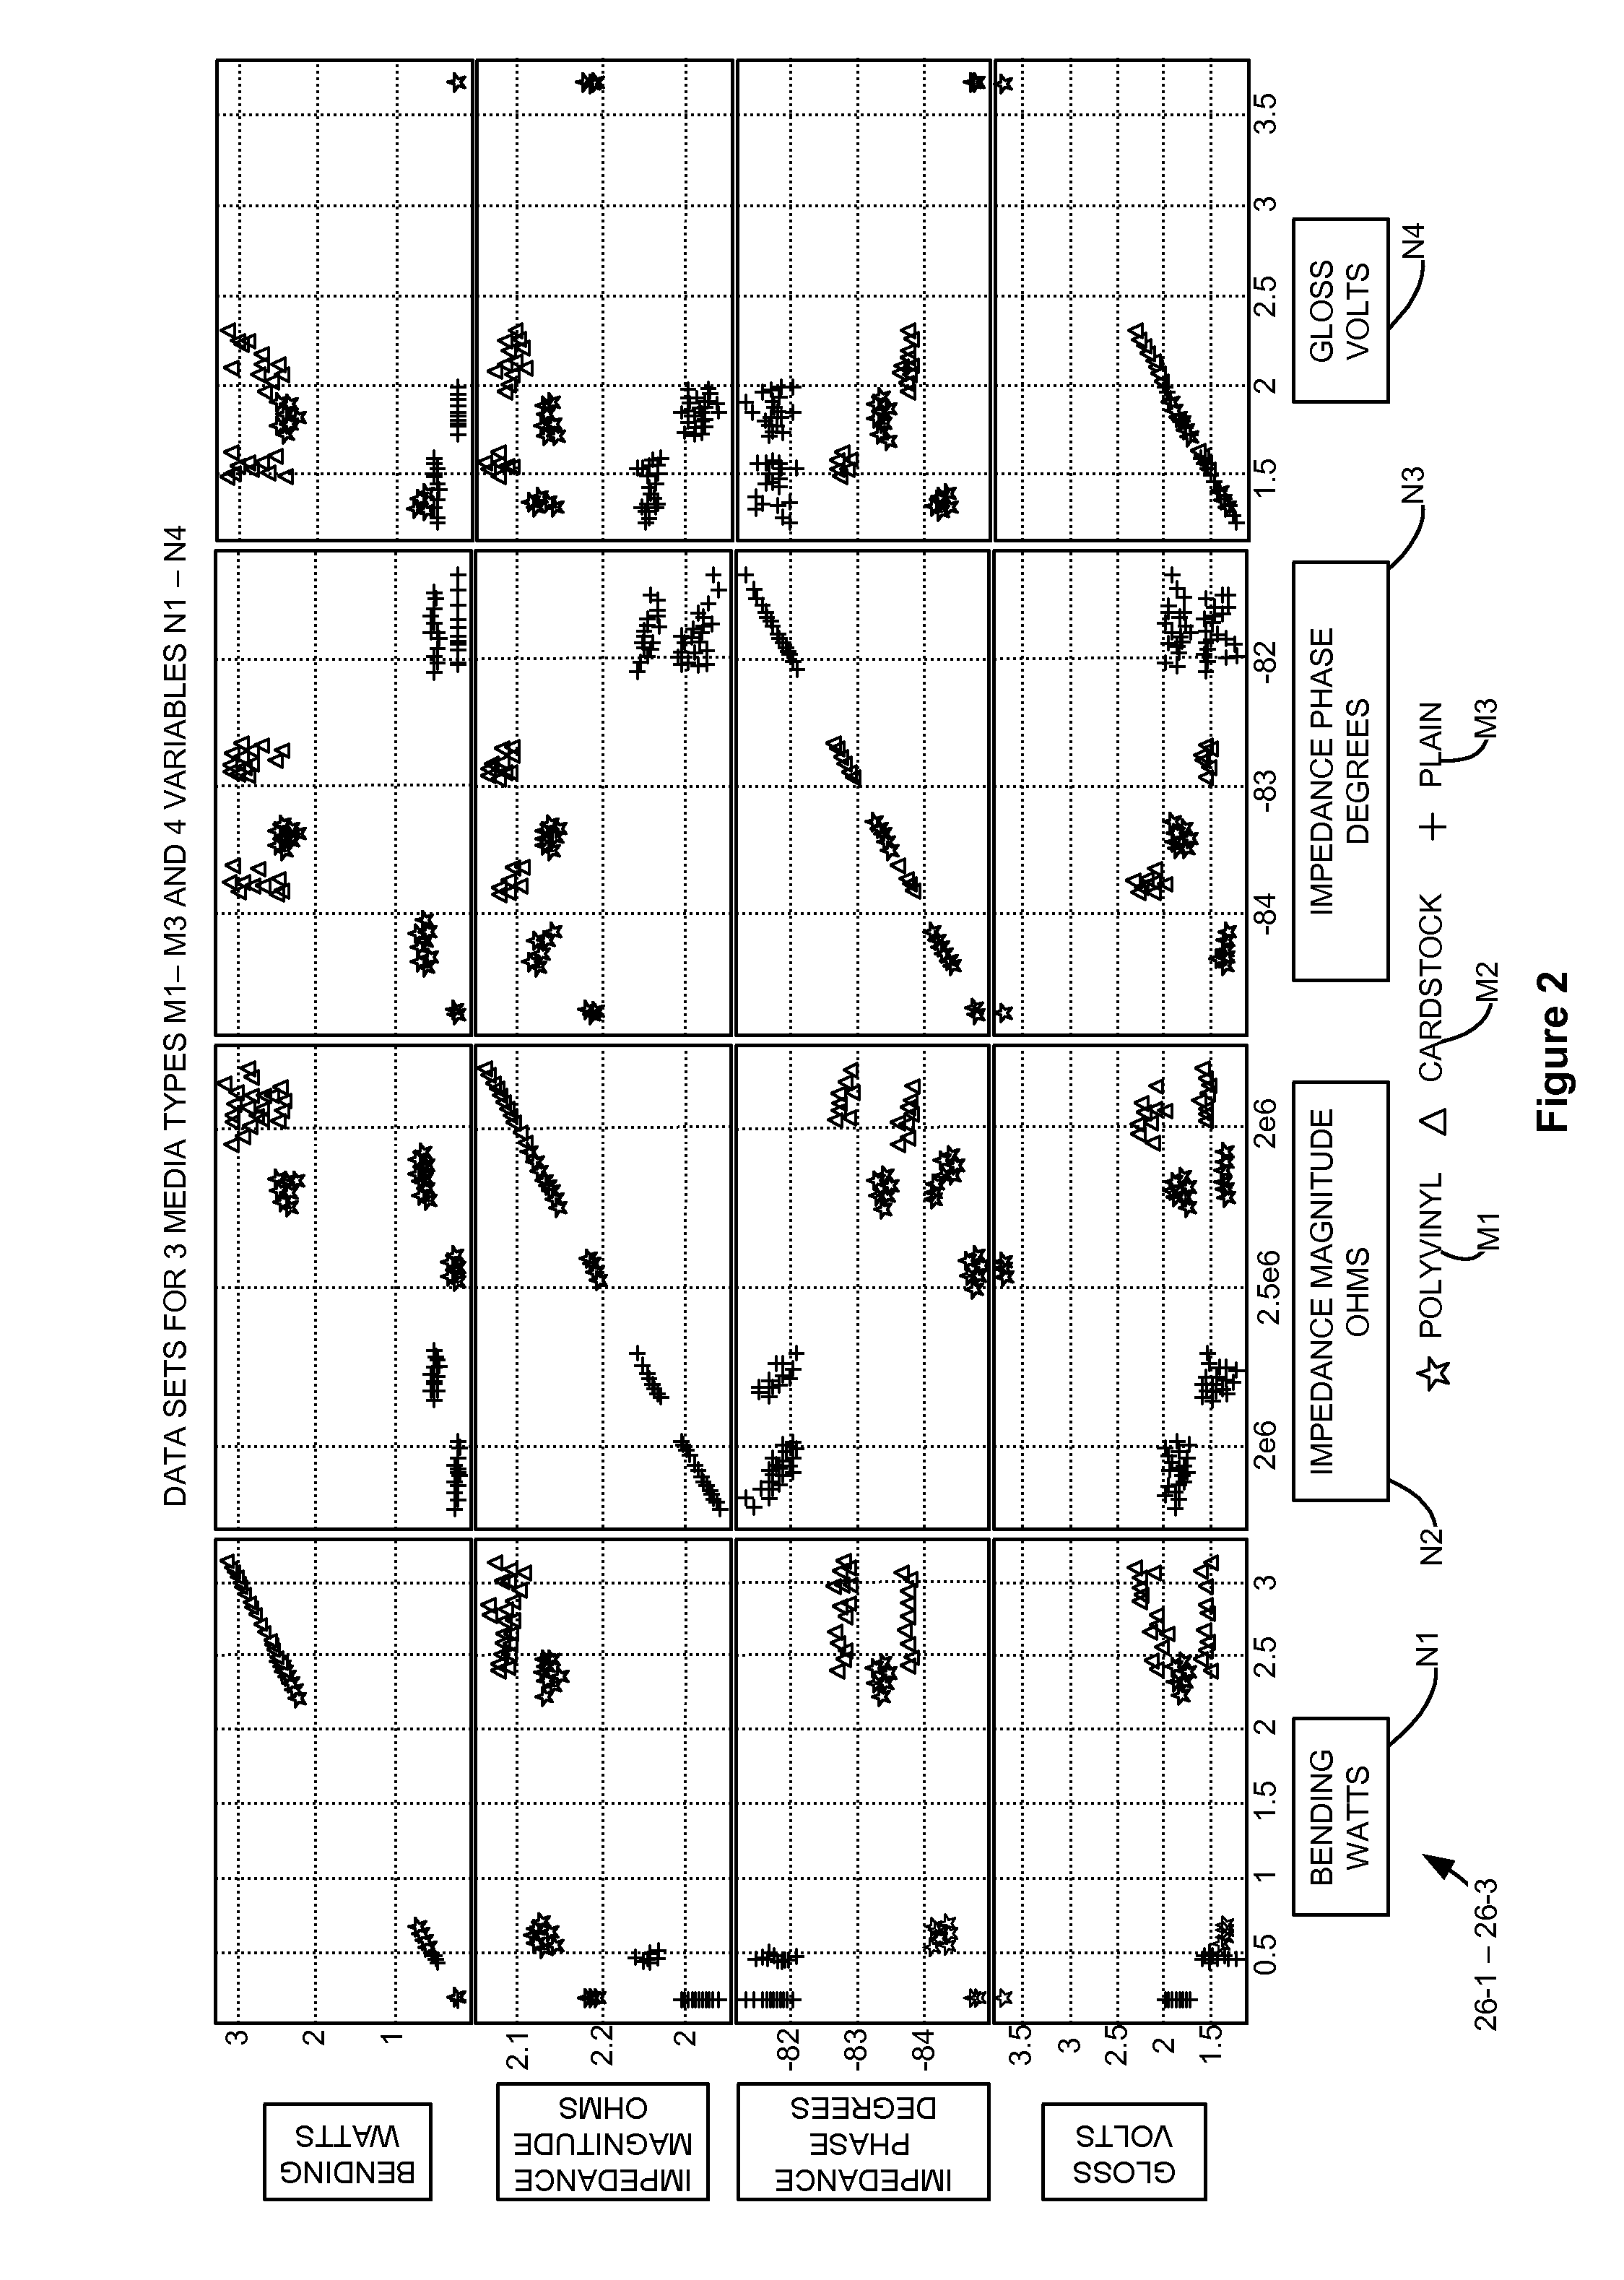 Imaging Device and Method for Sensing Media Type